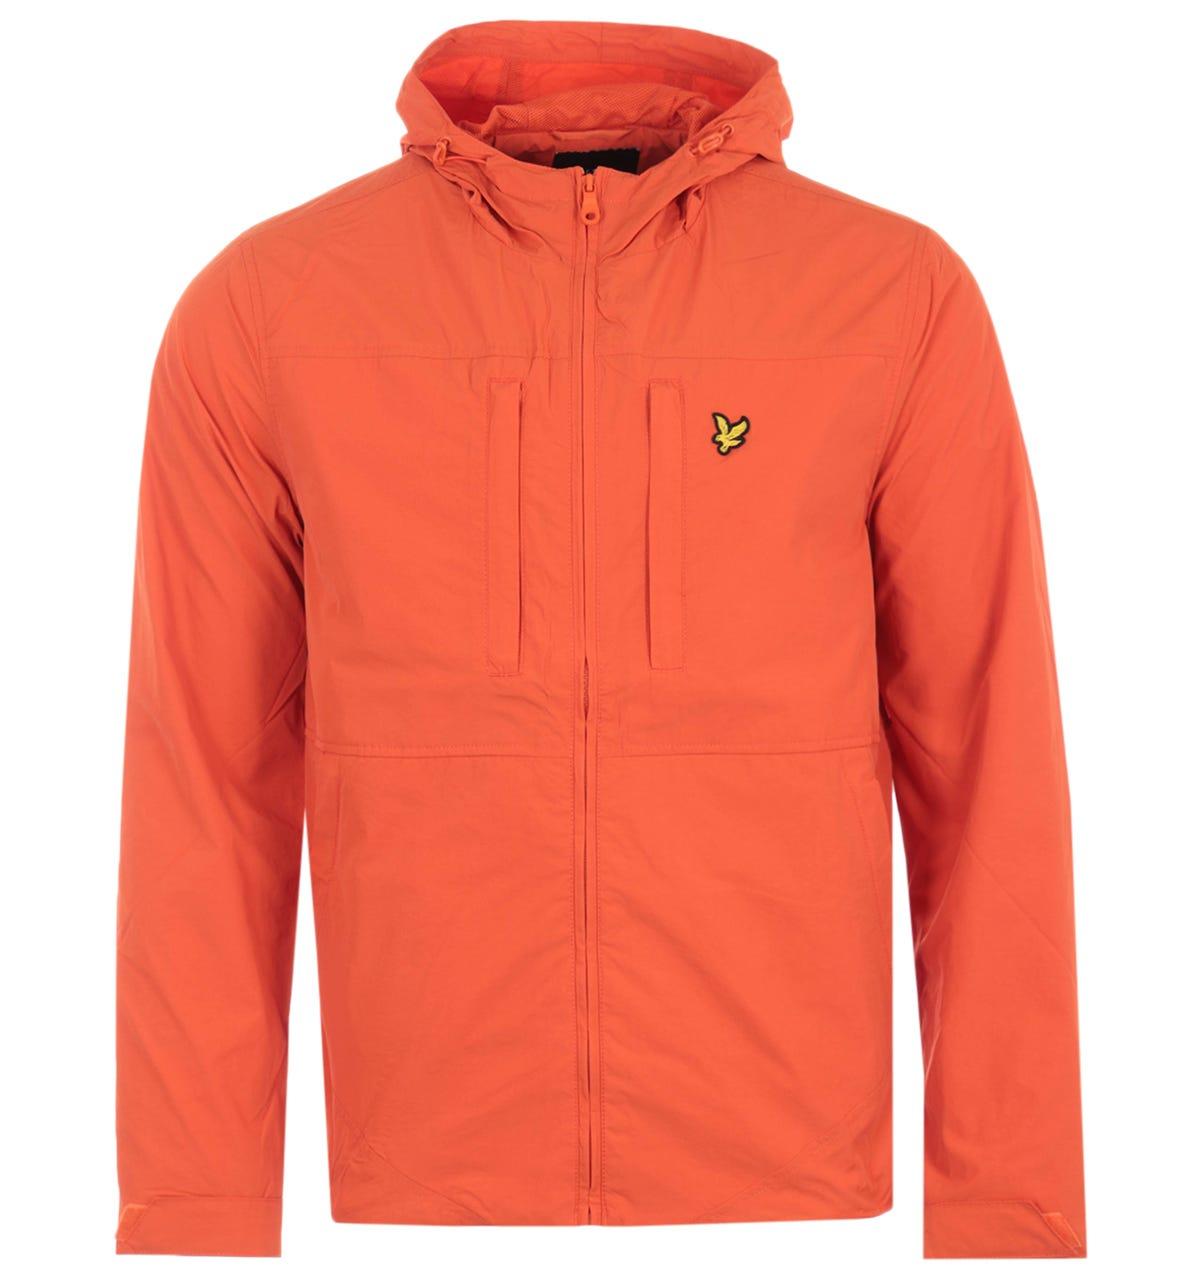 Lyle & Scott Synthetic Panelled Hooded Jacket in Orange for Men - Save 20%  - Lyst